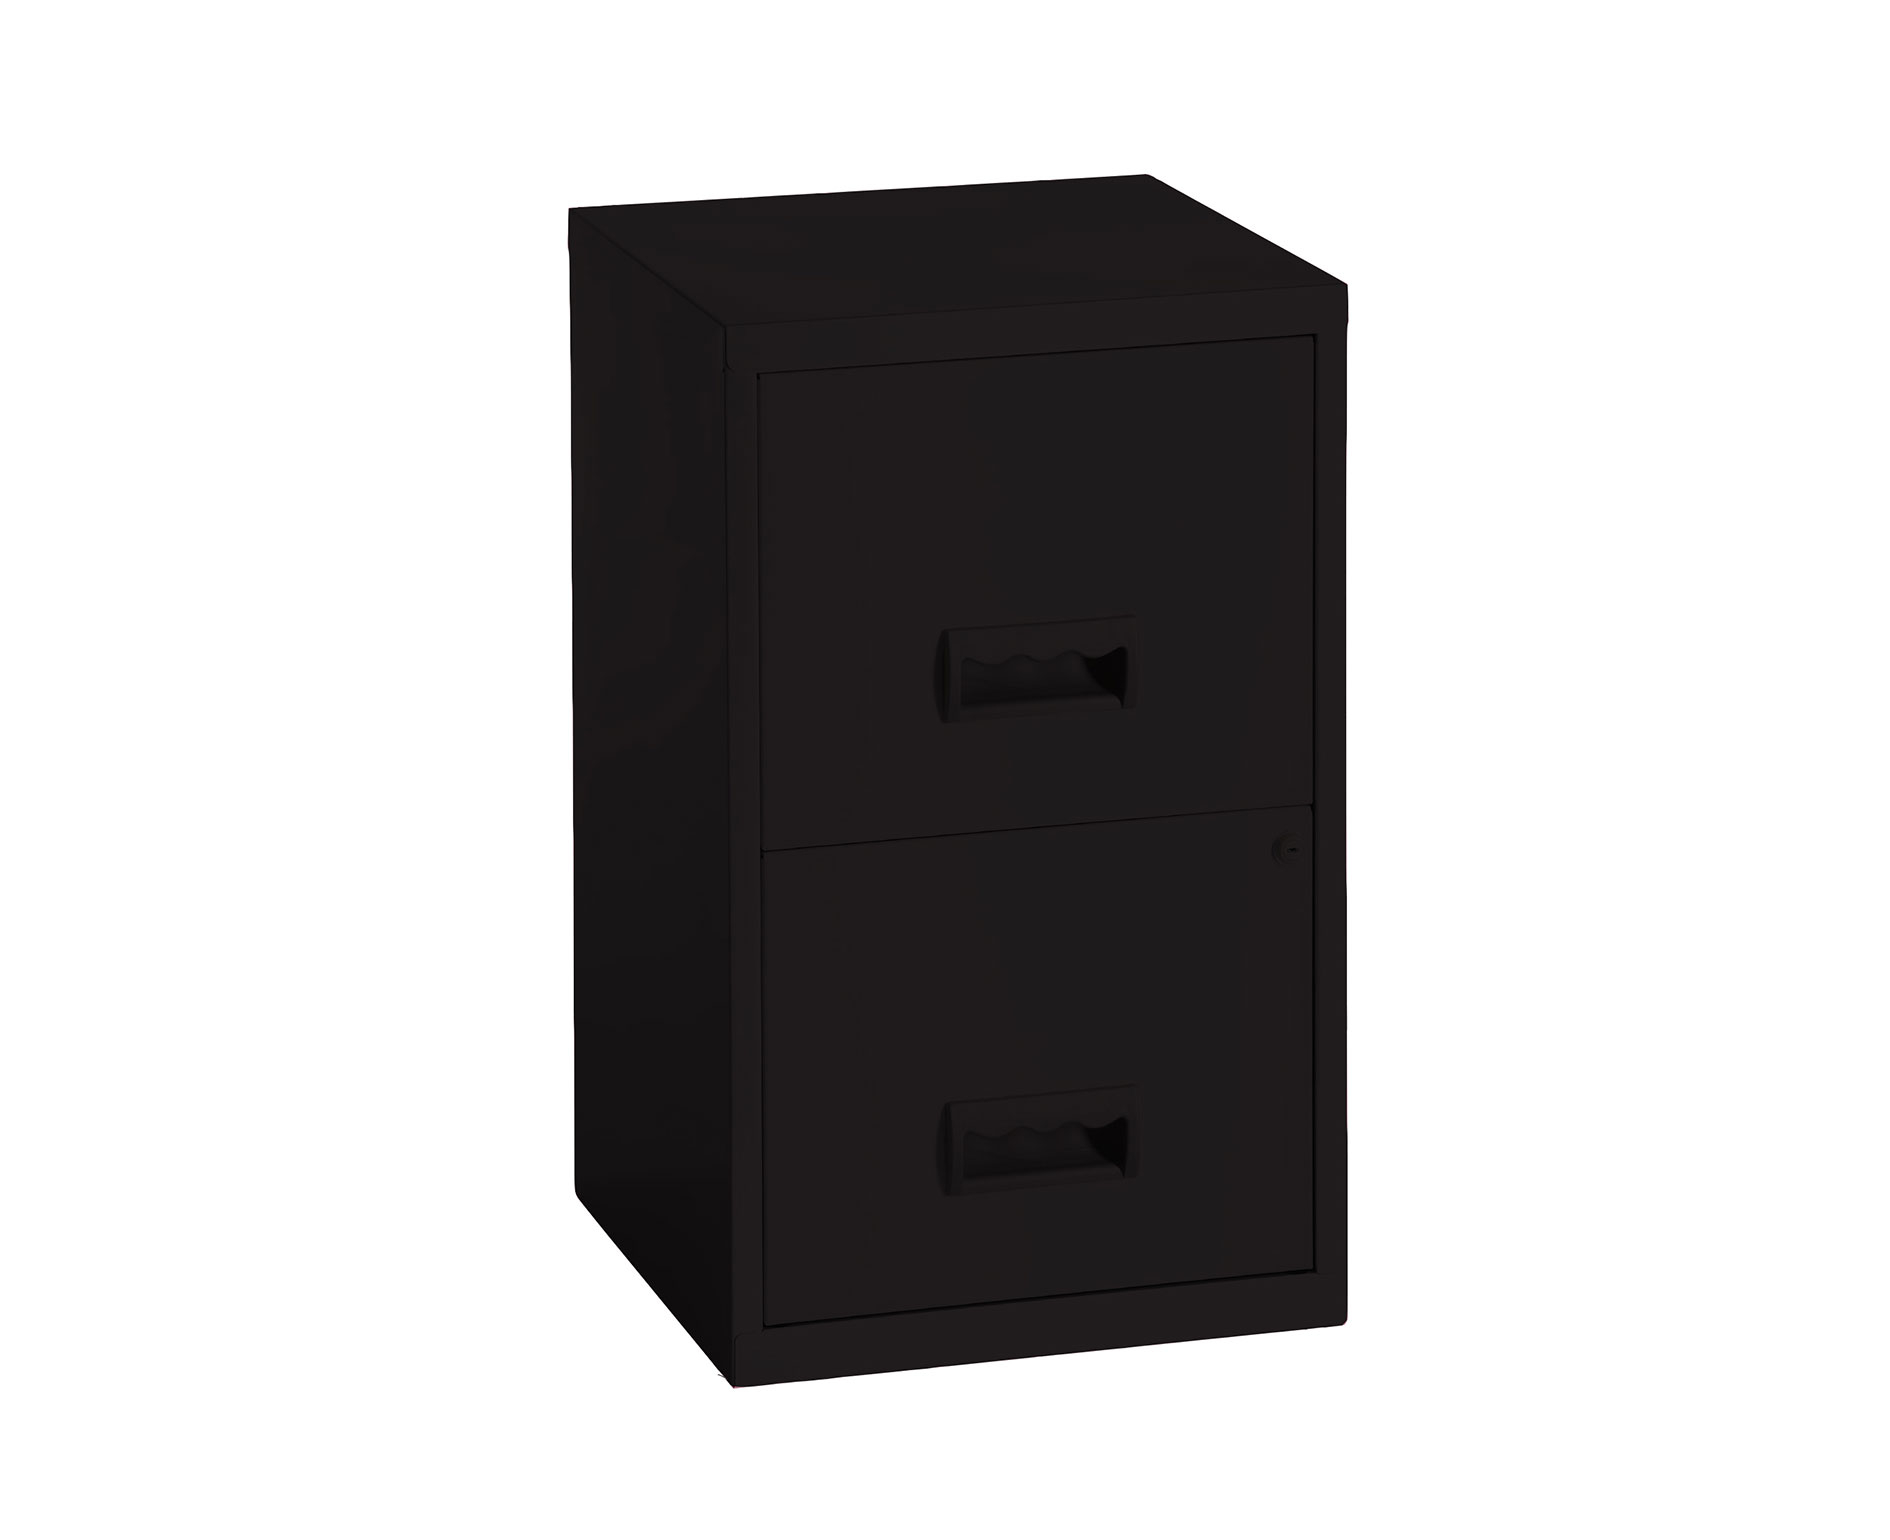 Filing Cabinets Home Office Cabinets Ryman Uk intended for size 1890 X 1540